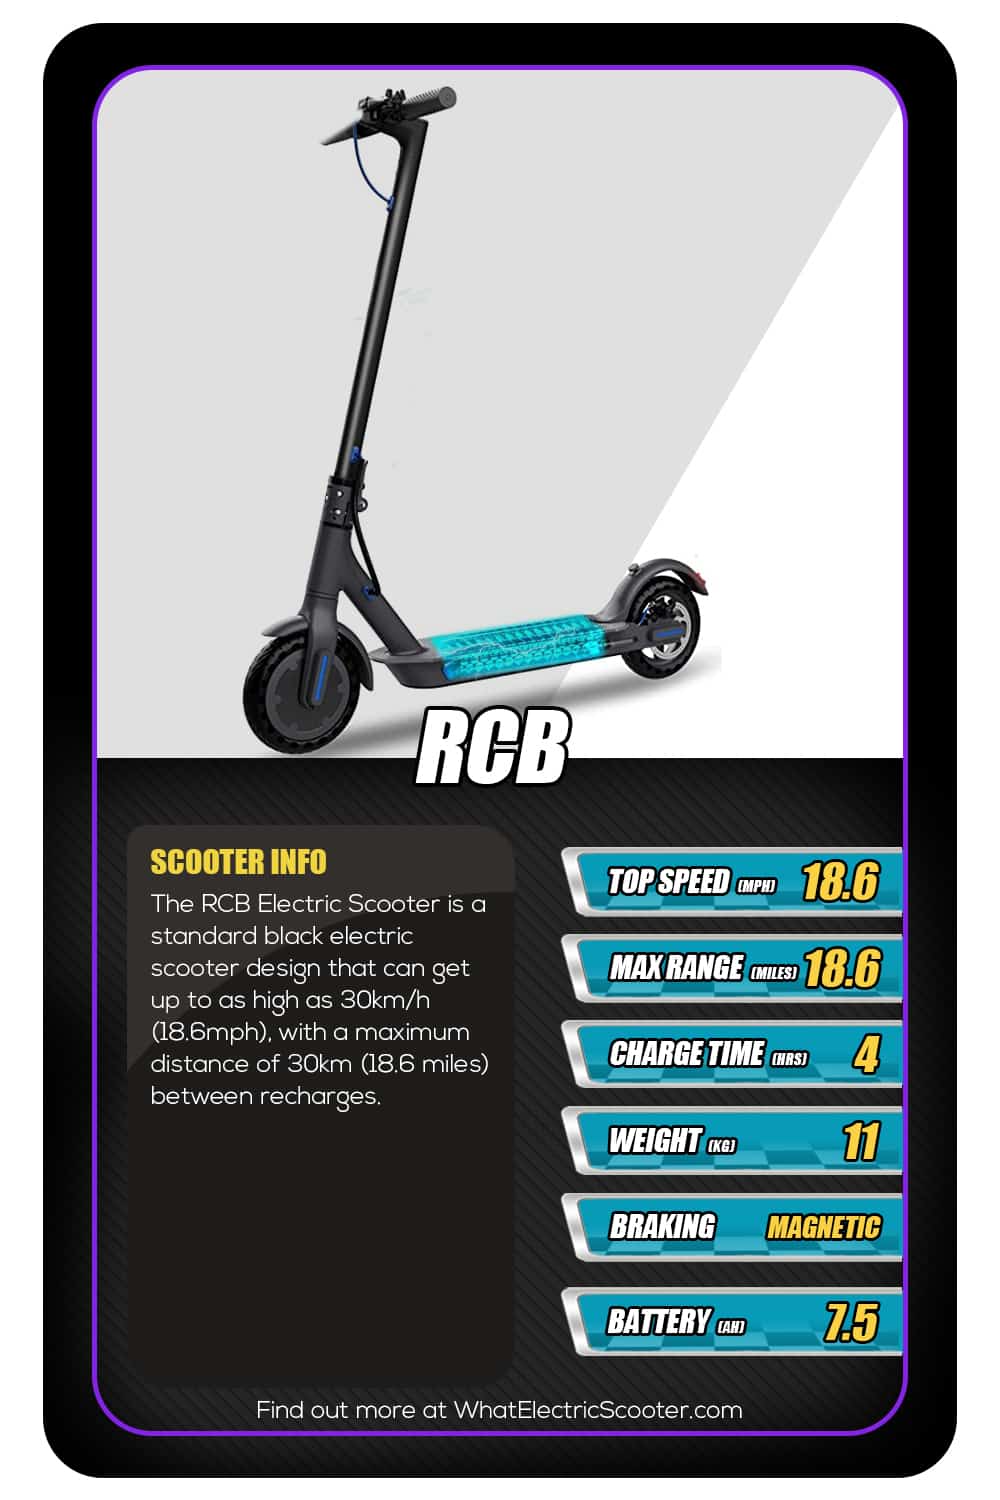 RCB electric scooter Top Trump card Ultimate Waterproof Electric Scooters Guide (Top 3 Options)